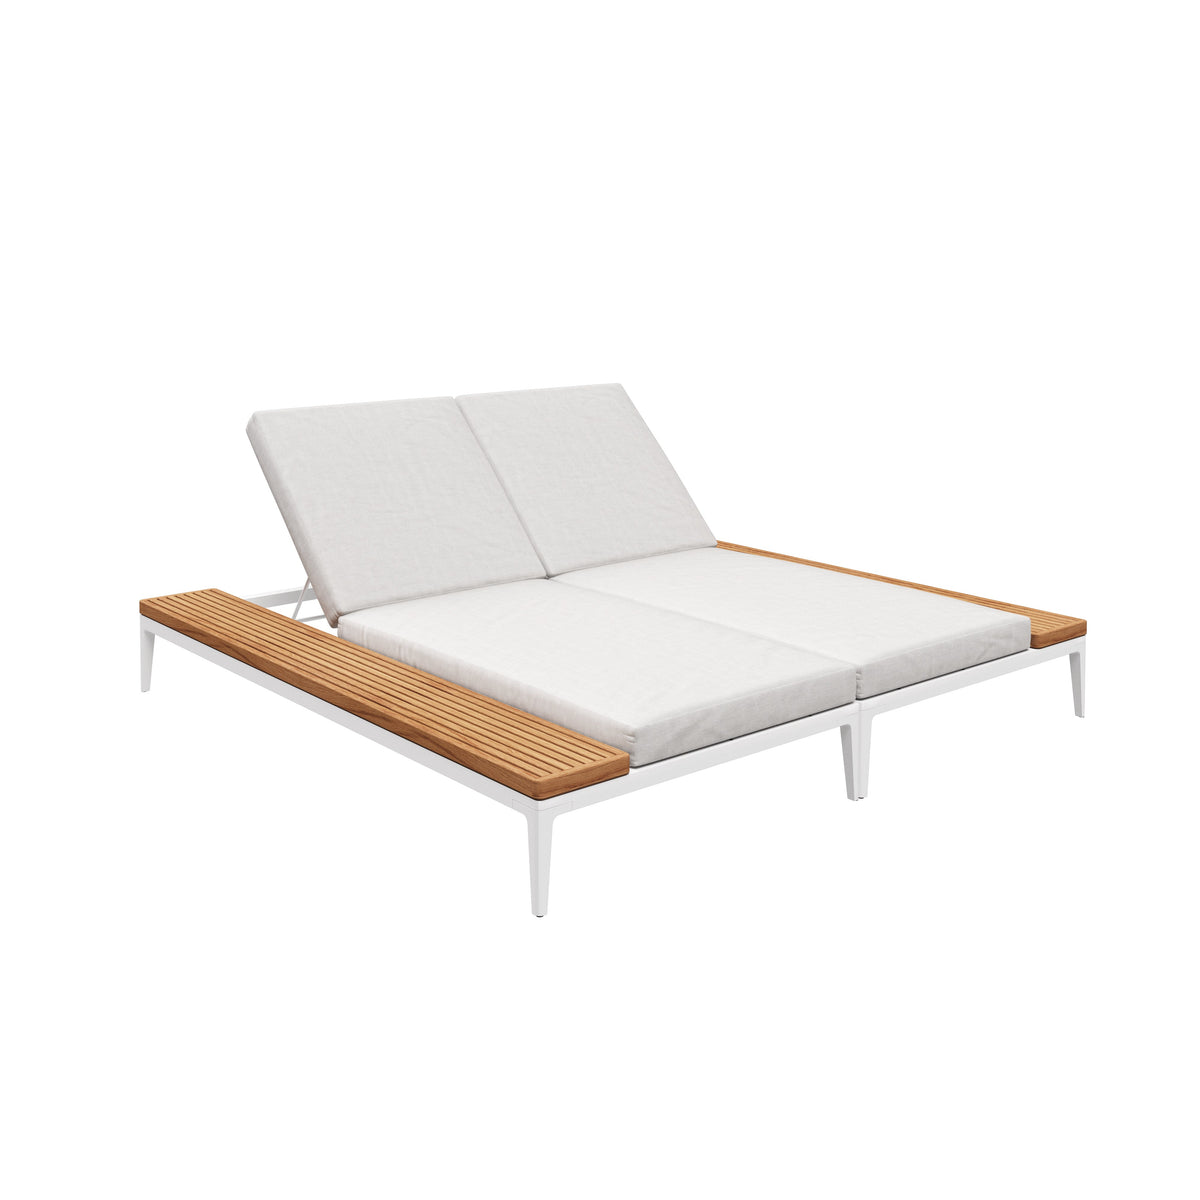 Grid Double Lounger Teak-Gloster-Contract Furniture Store